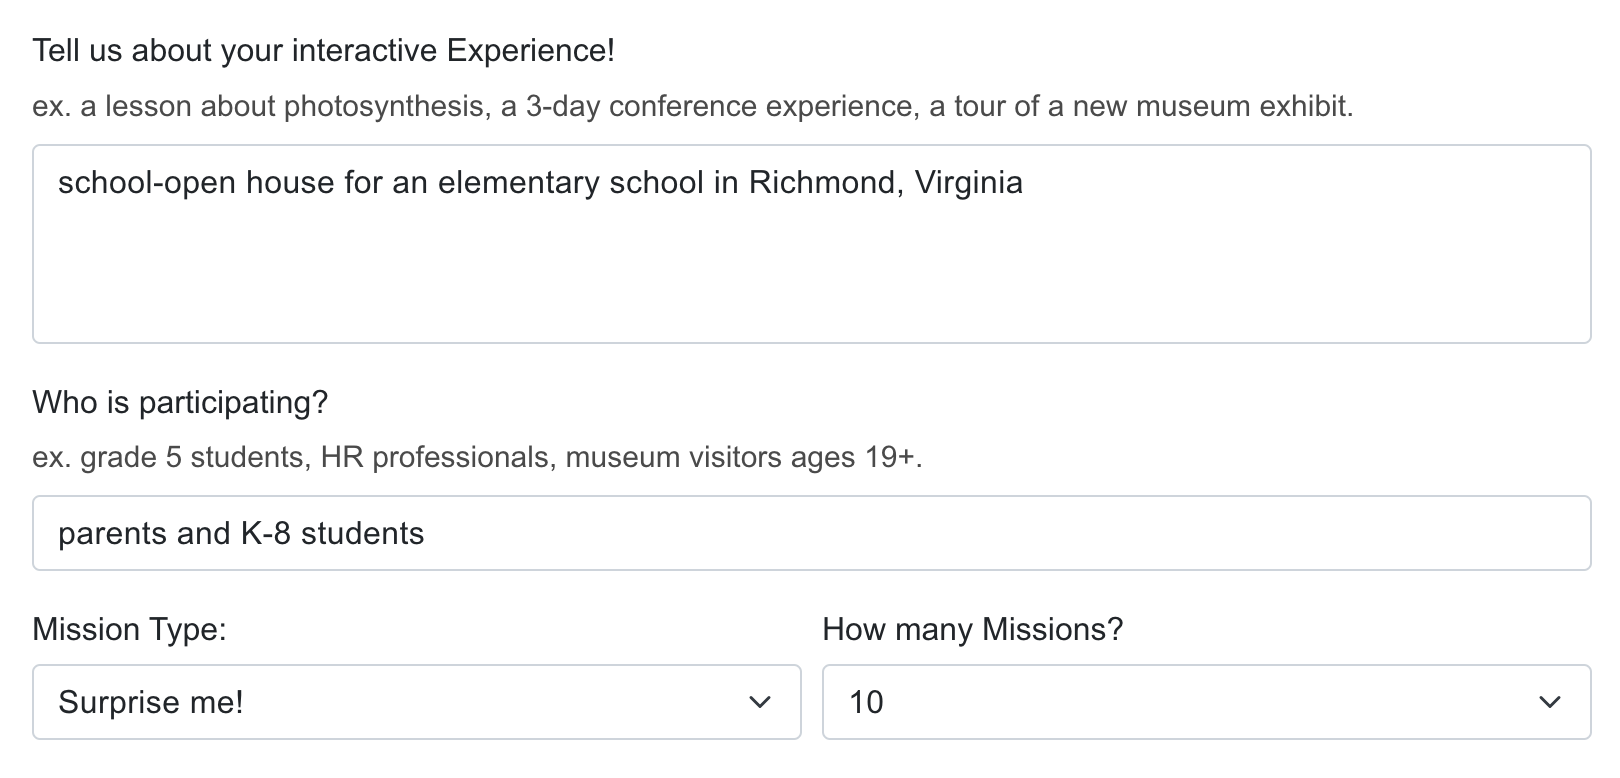 Tell us about your interactive Experience: school-open house for an elementary school in Richmond, Virginia. Who is participating? parents and K-8 students.